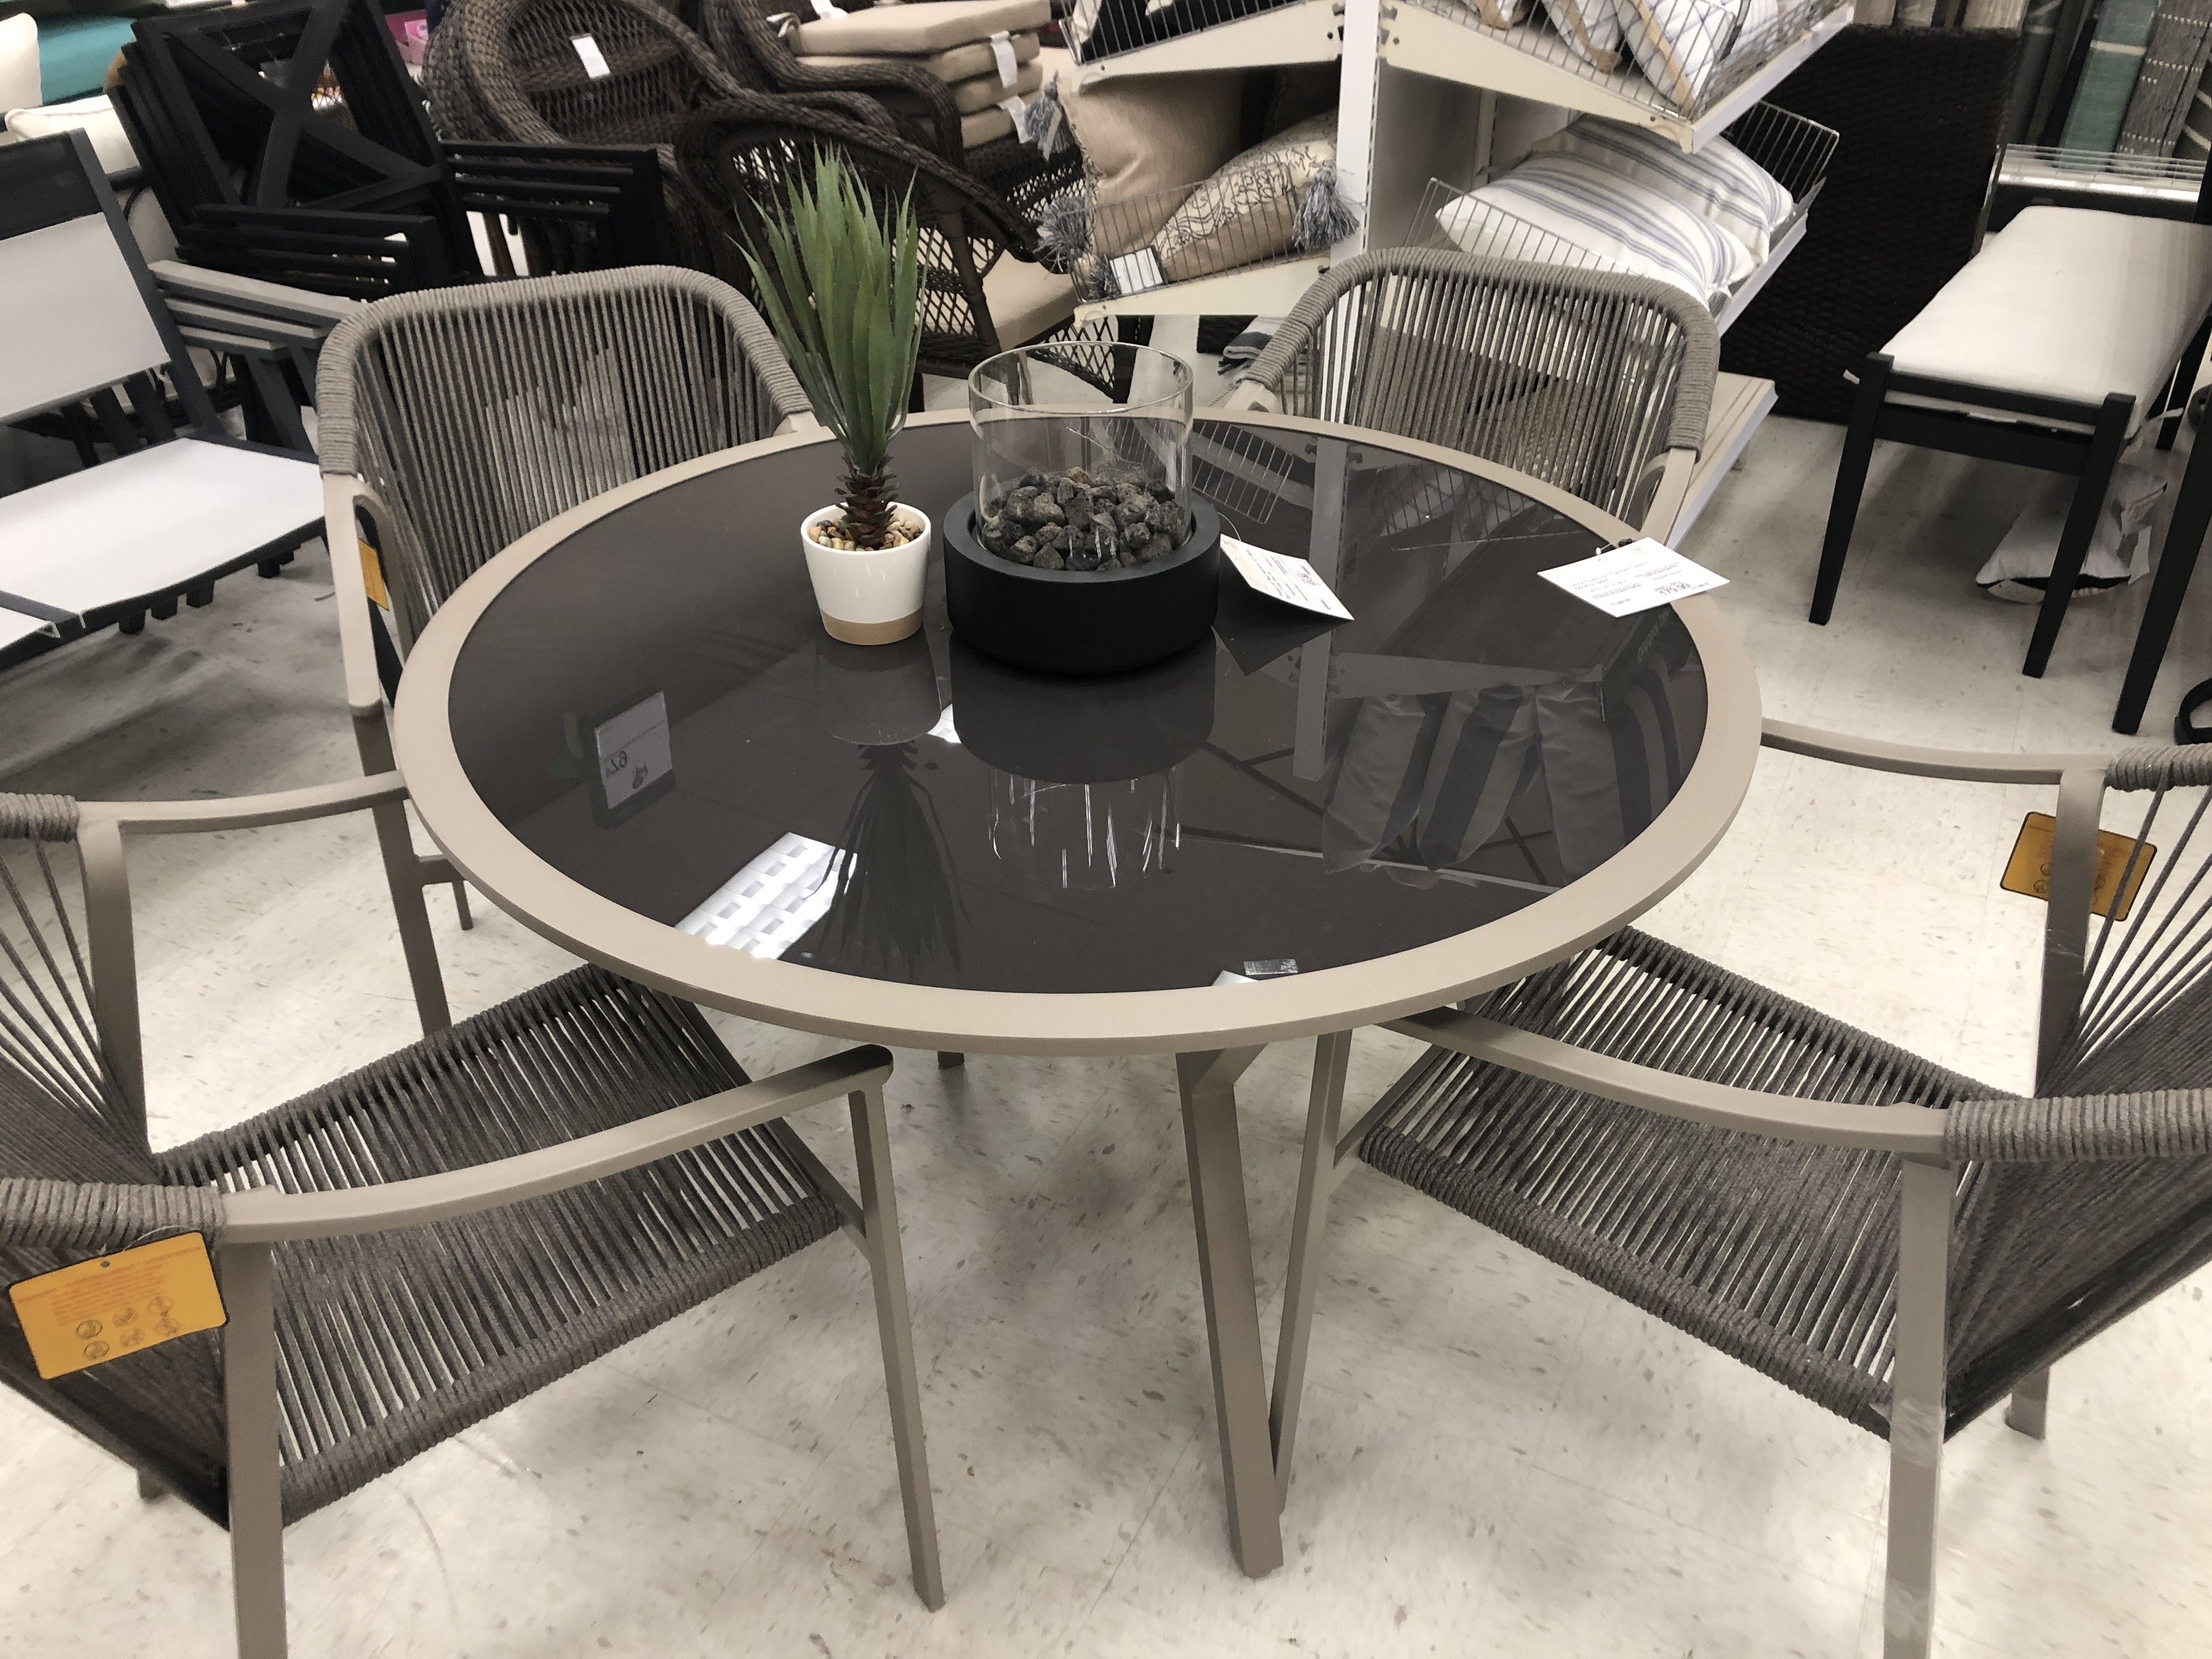 Levy 5Pc Patio Dining Set Natural – Project 62 In 2019 | Luisa Mauro Intended For Best And Newest Wallflower 3 Piece Dining Sets (View 16 of 20)